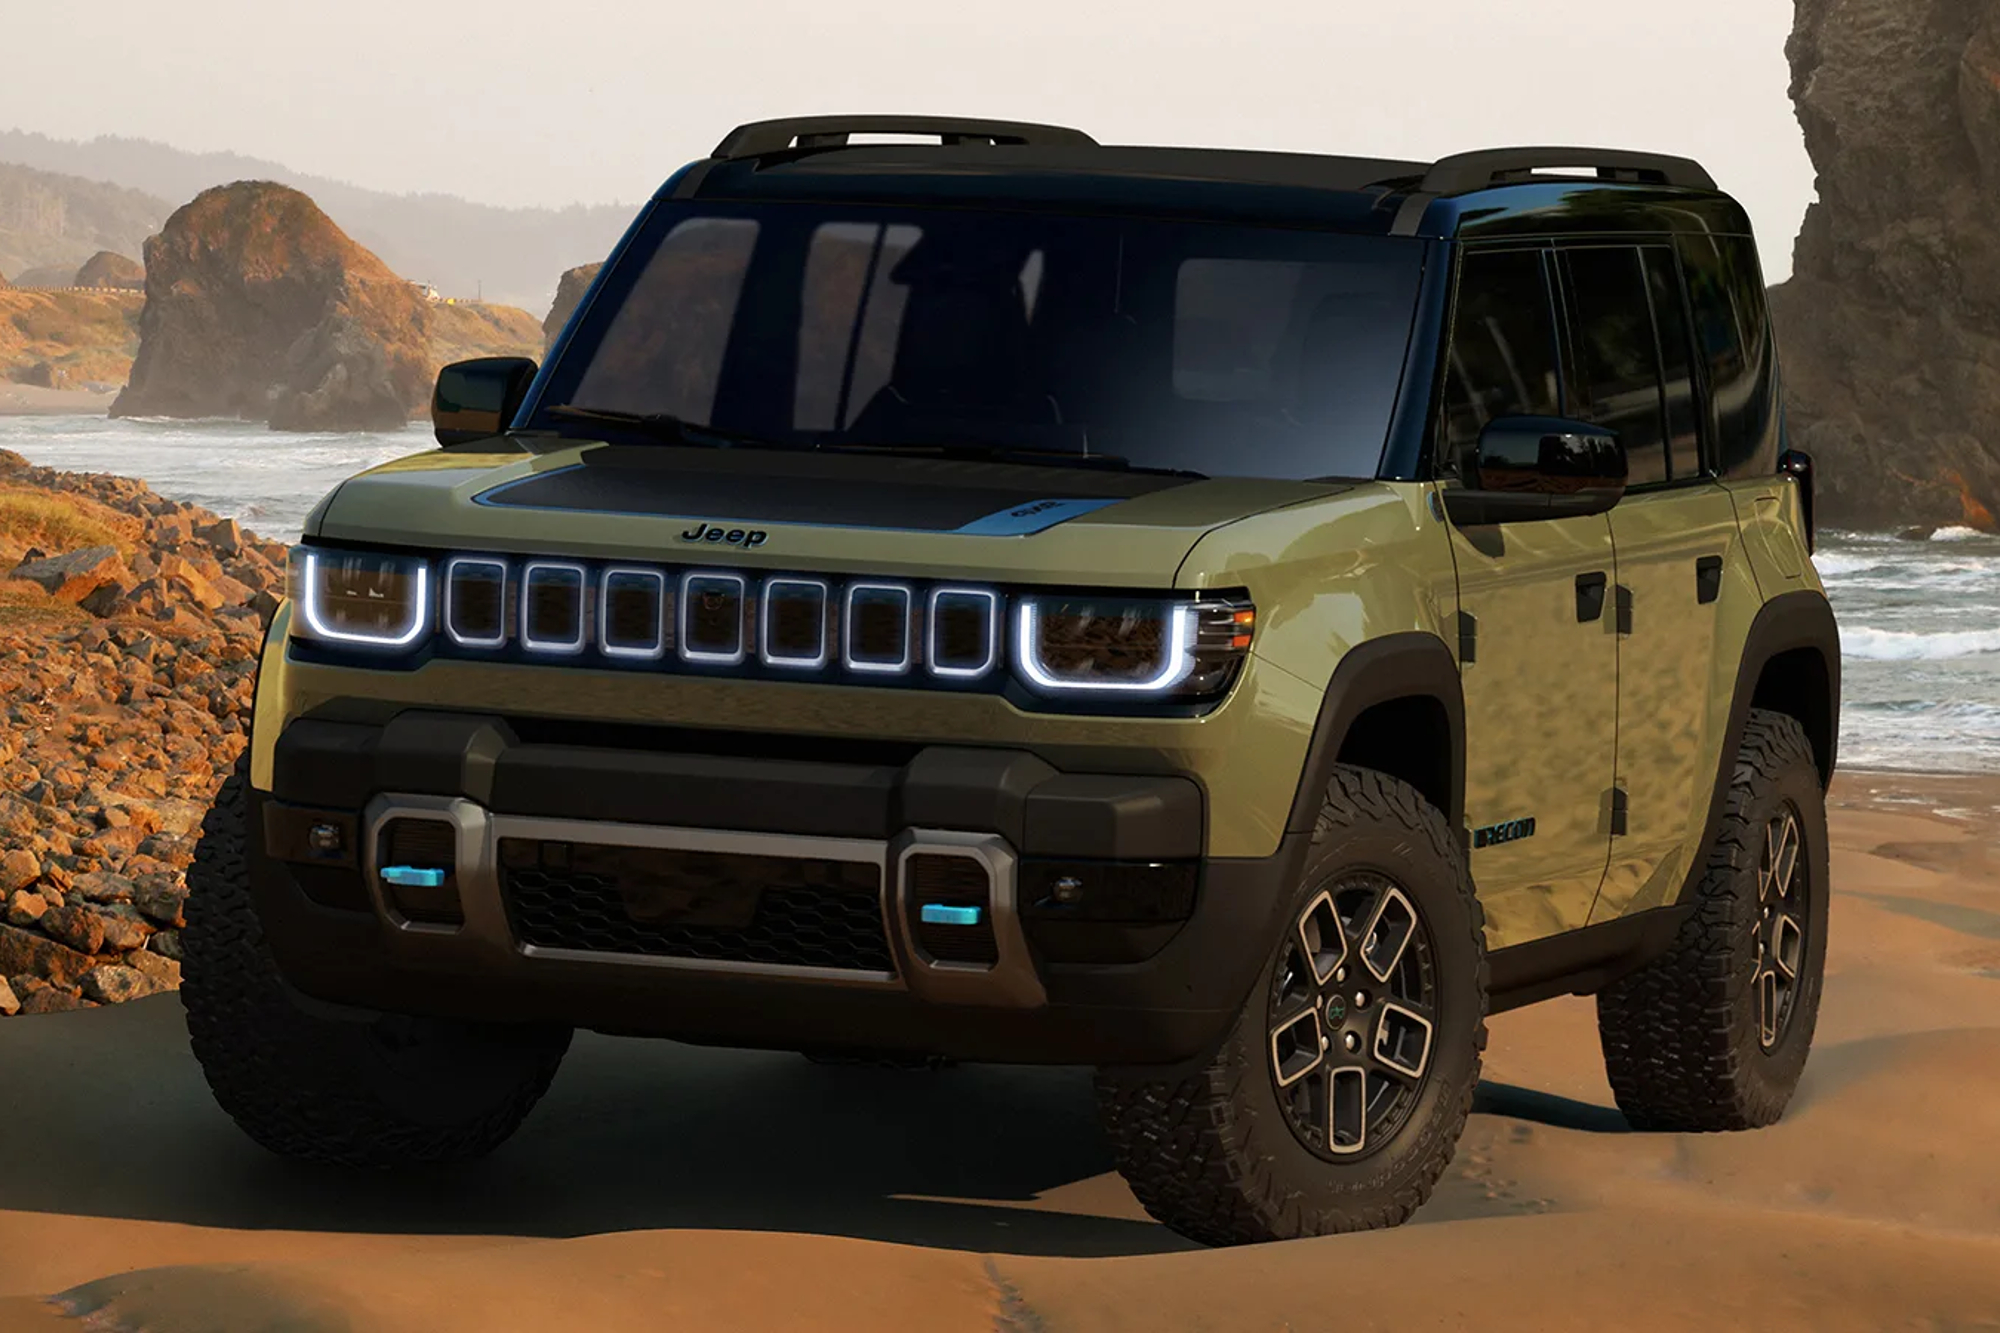 Green Jeep Recon Concept EV on beach with rocky hills nearby and in the background.